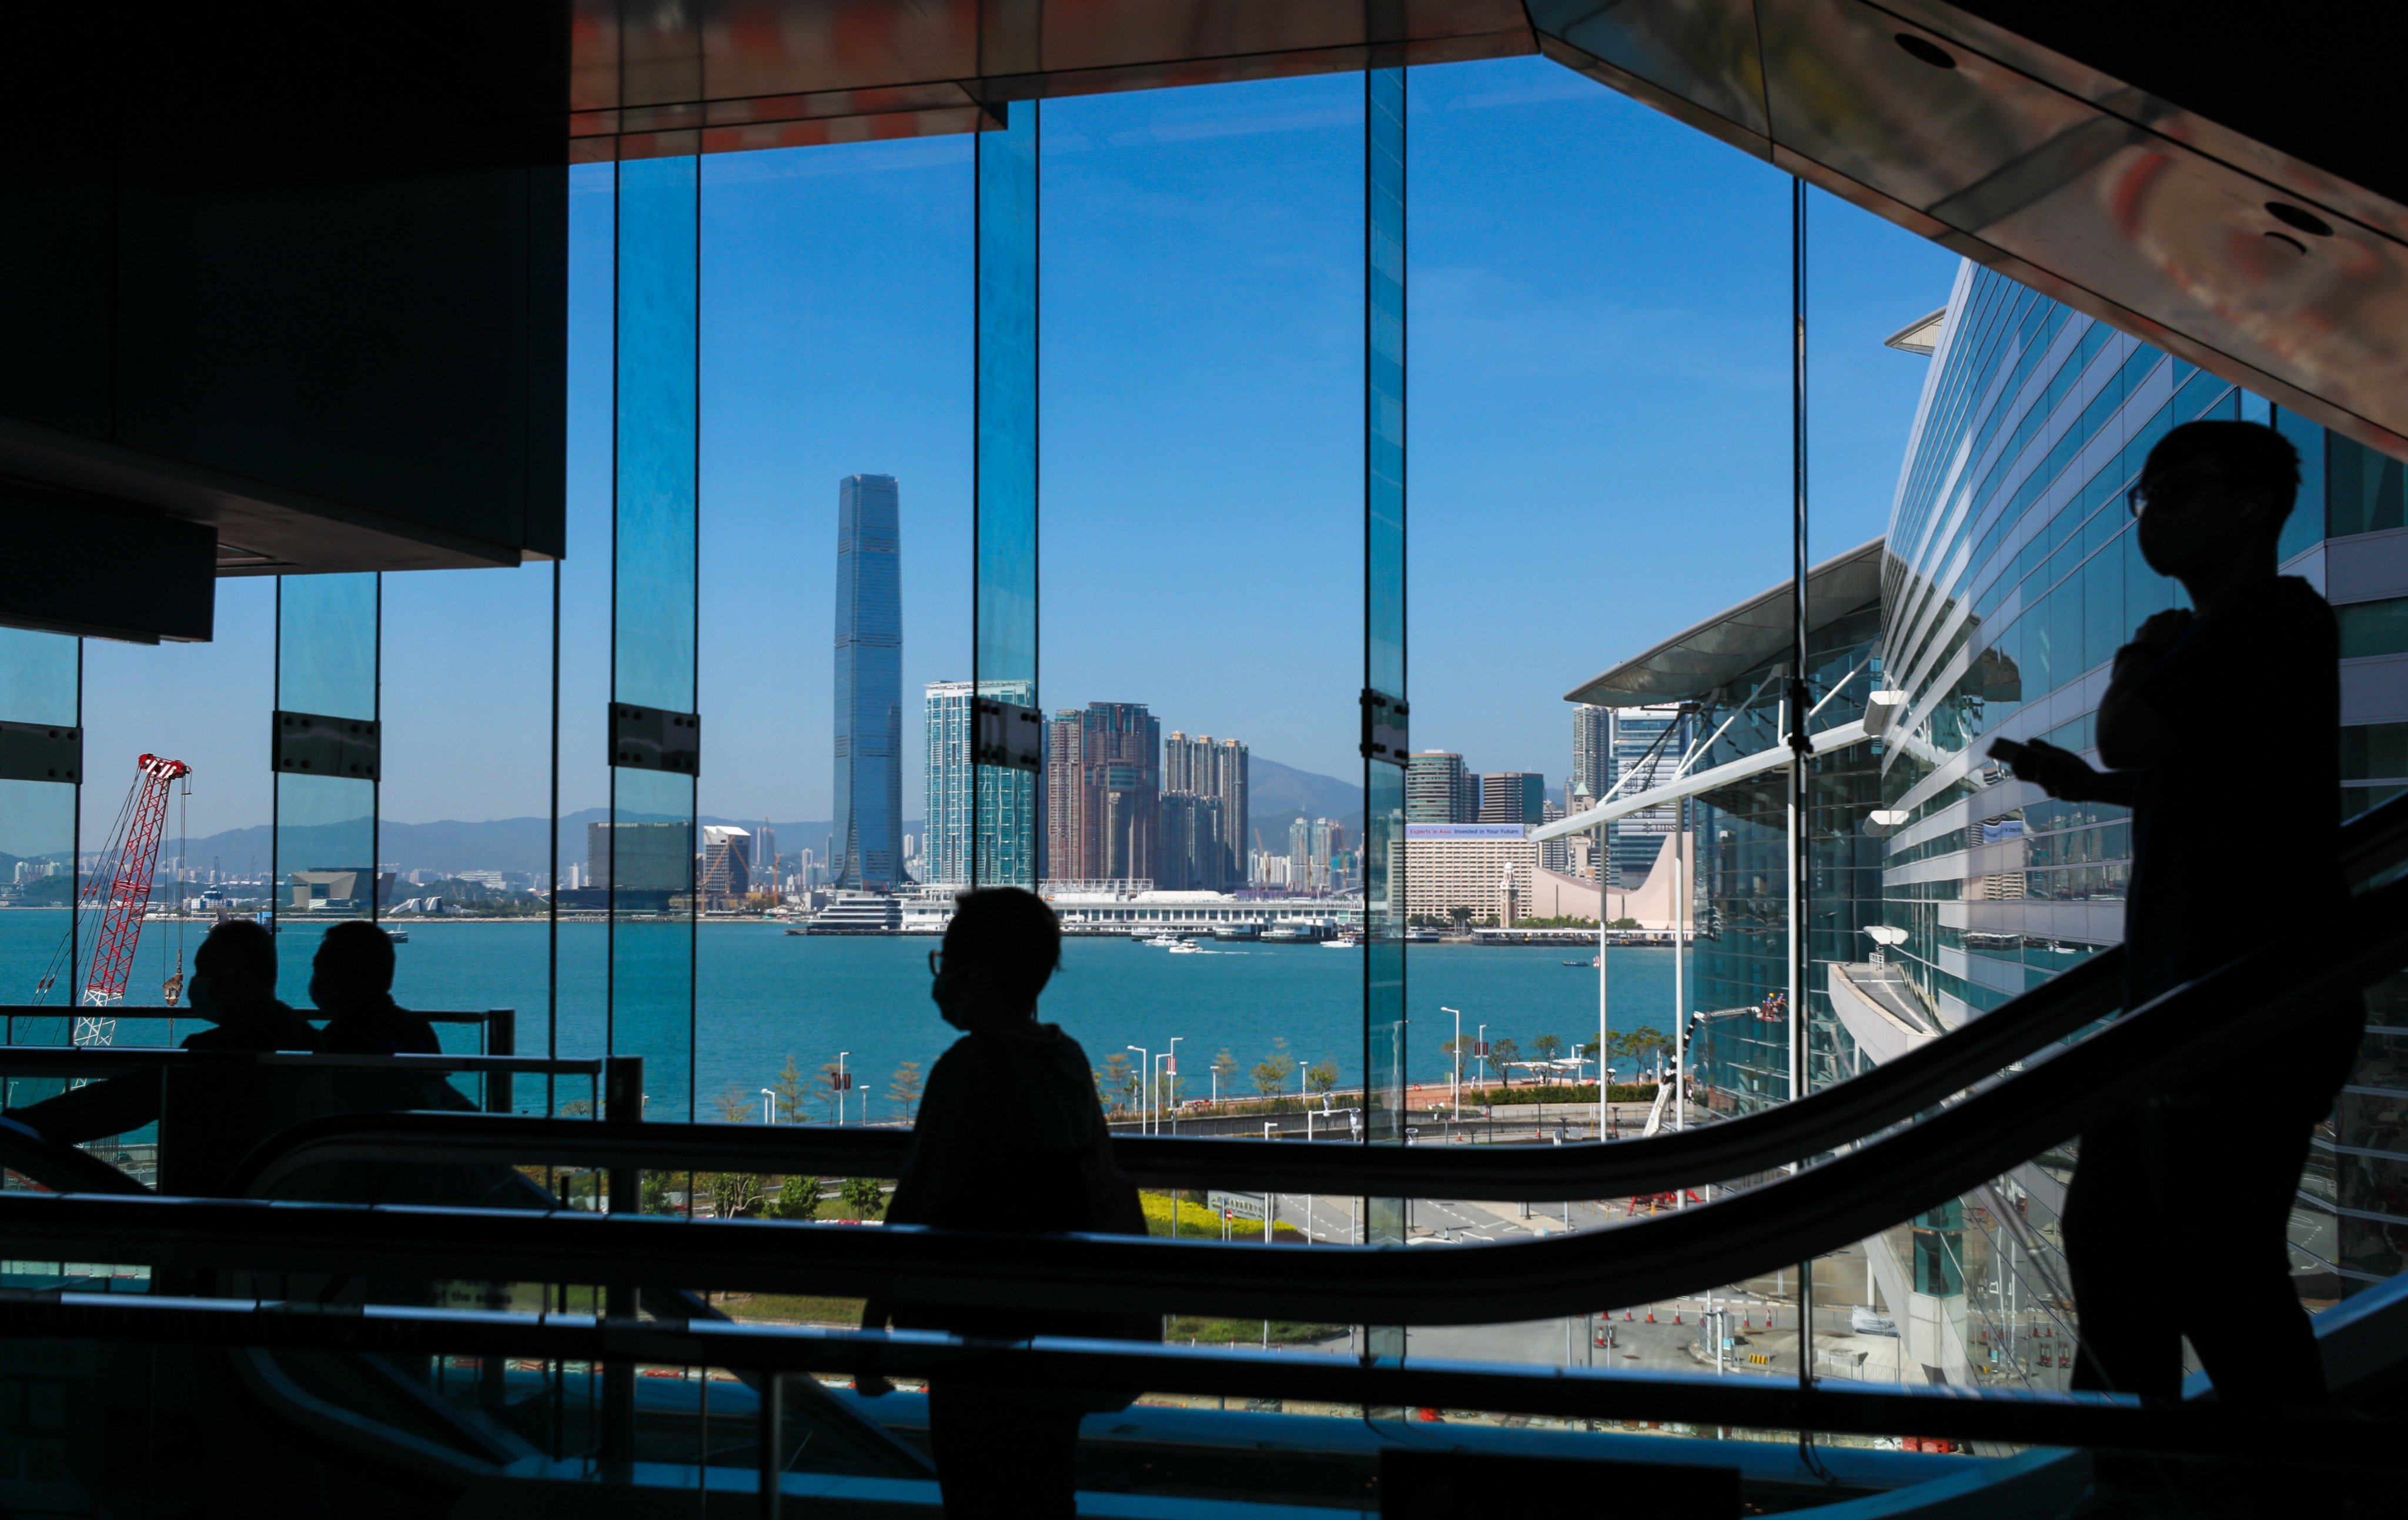 Hong Kong’s finance chief says Beijing’s target can be achieved “with the solid foundation of the mainland economy and policies, coupled with strong leadership and unity from top to bottom”. Photo: Xiaomei Chen